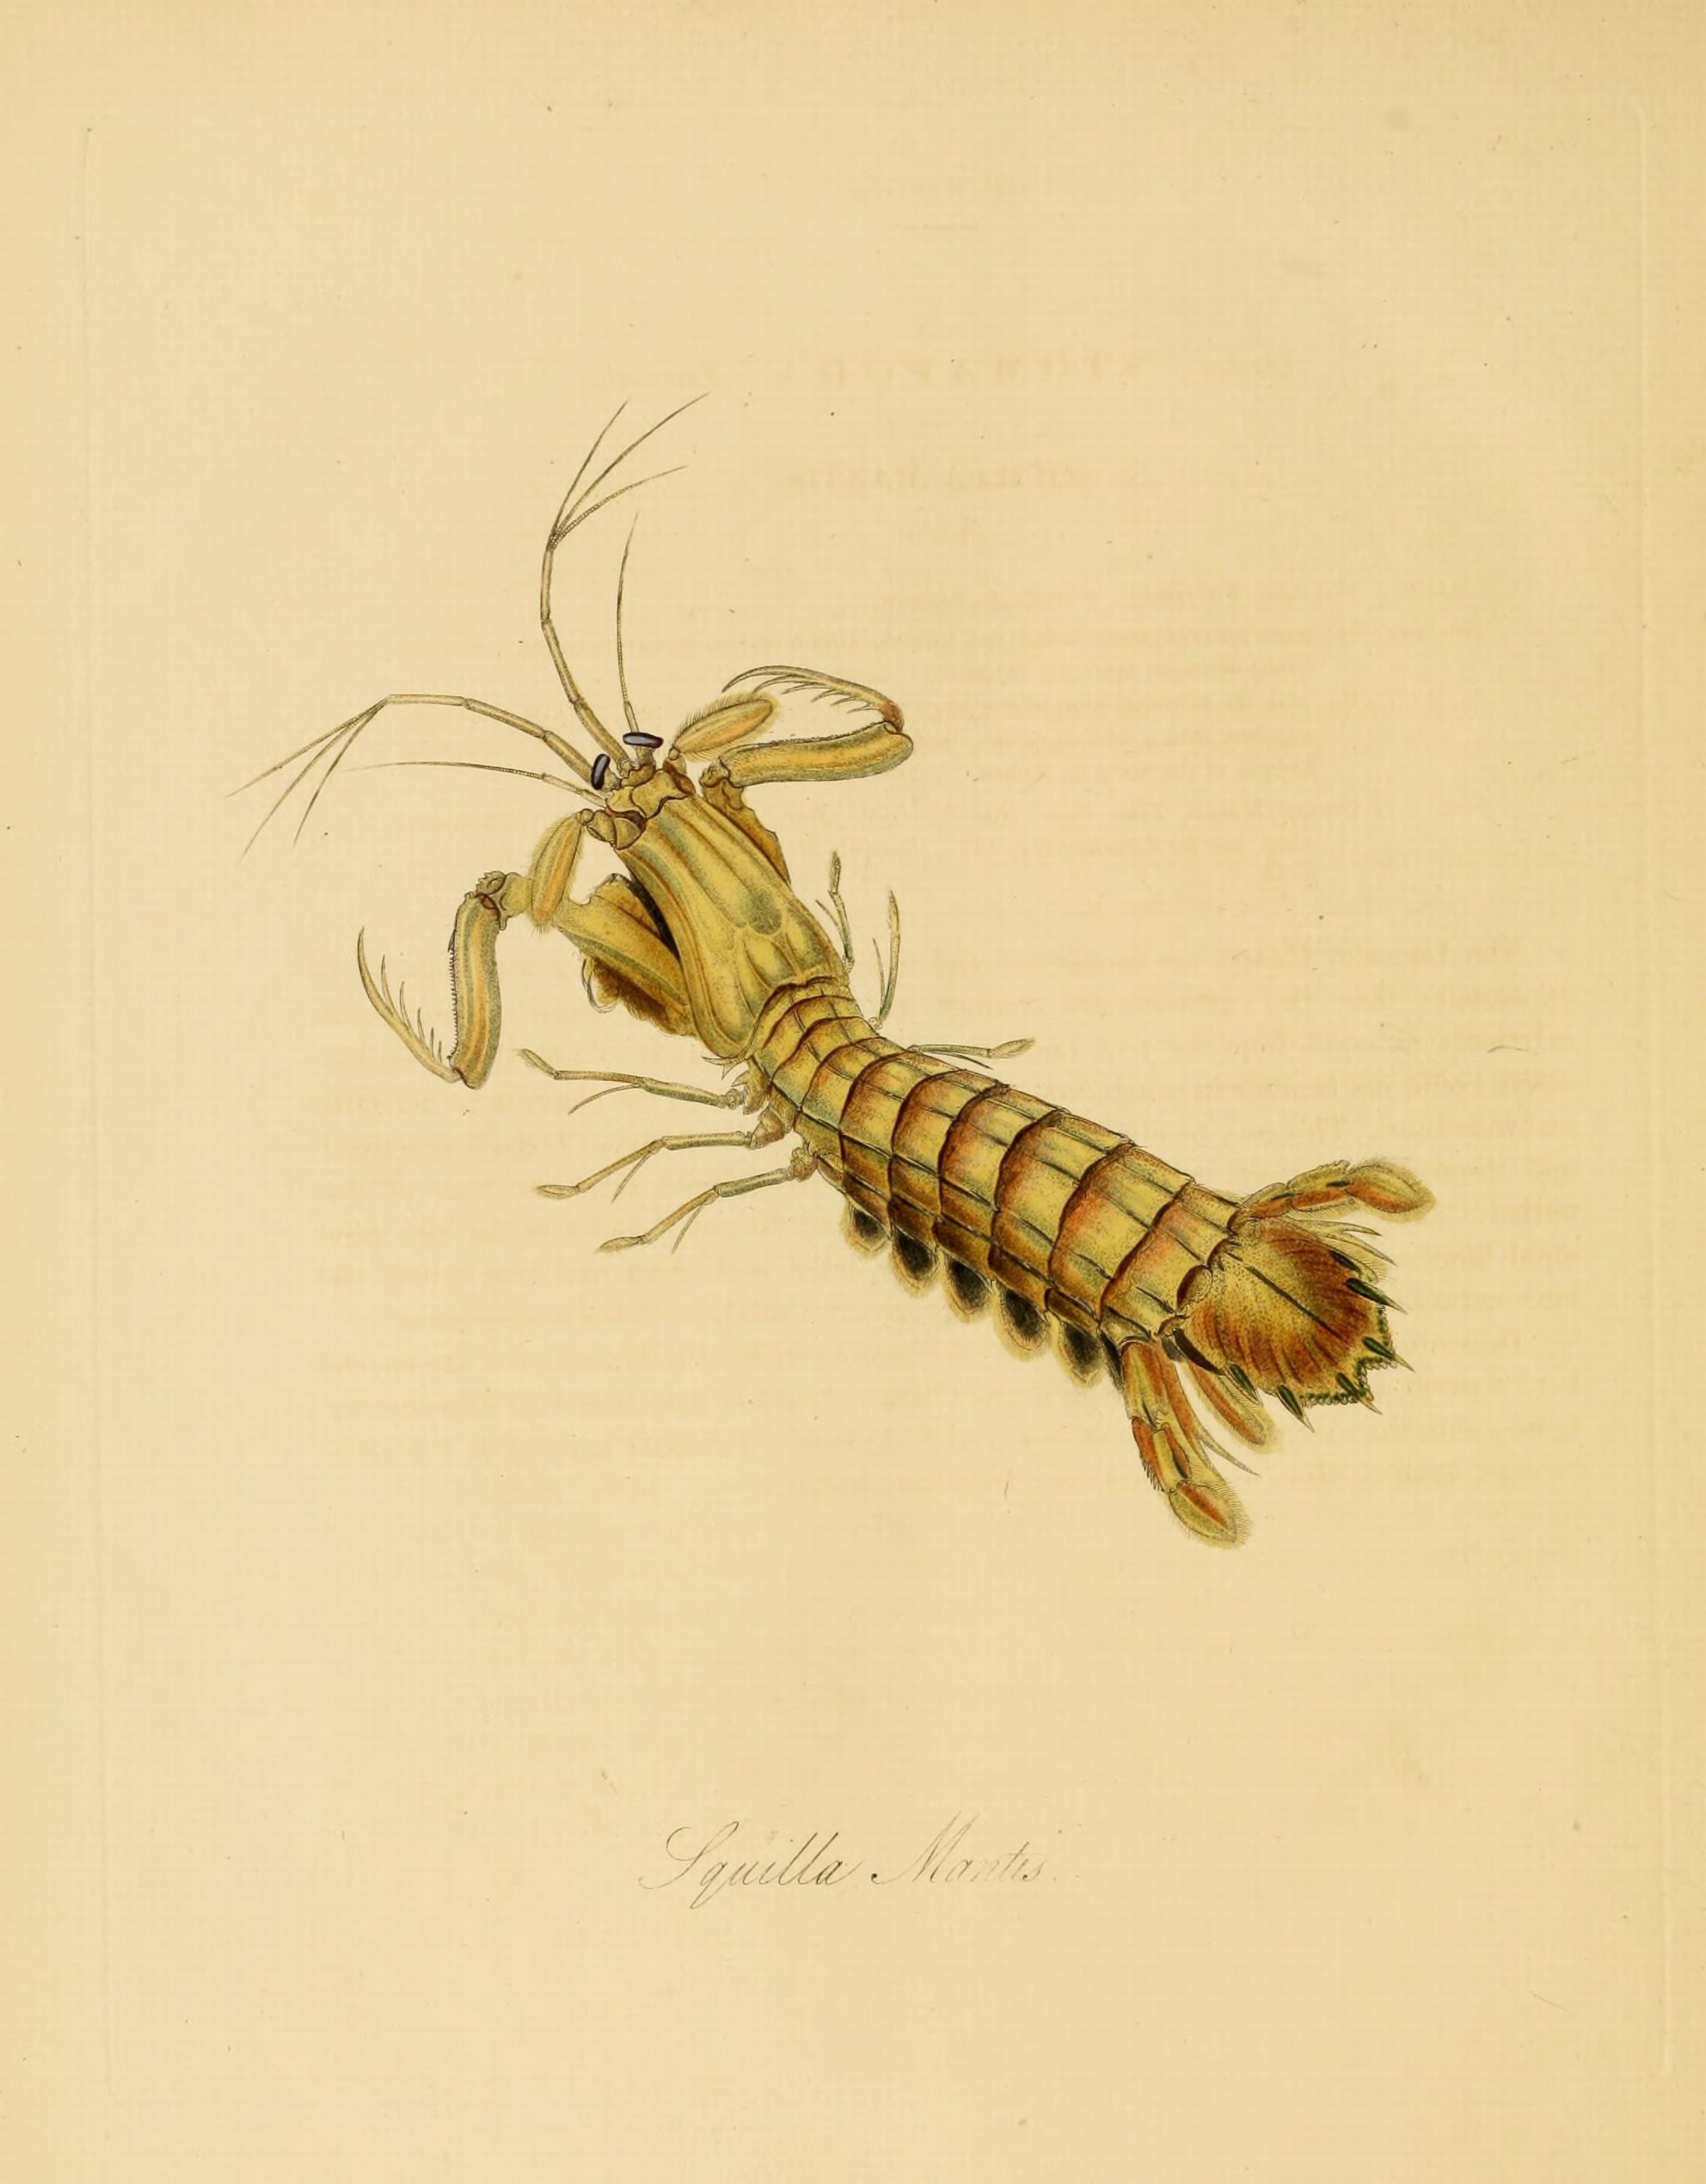 Donovan - Insects of China, 1838 - pl 49